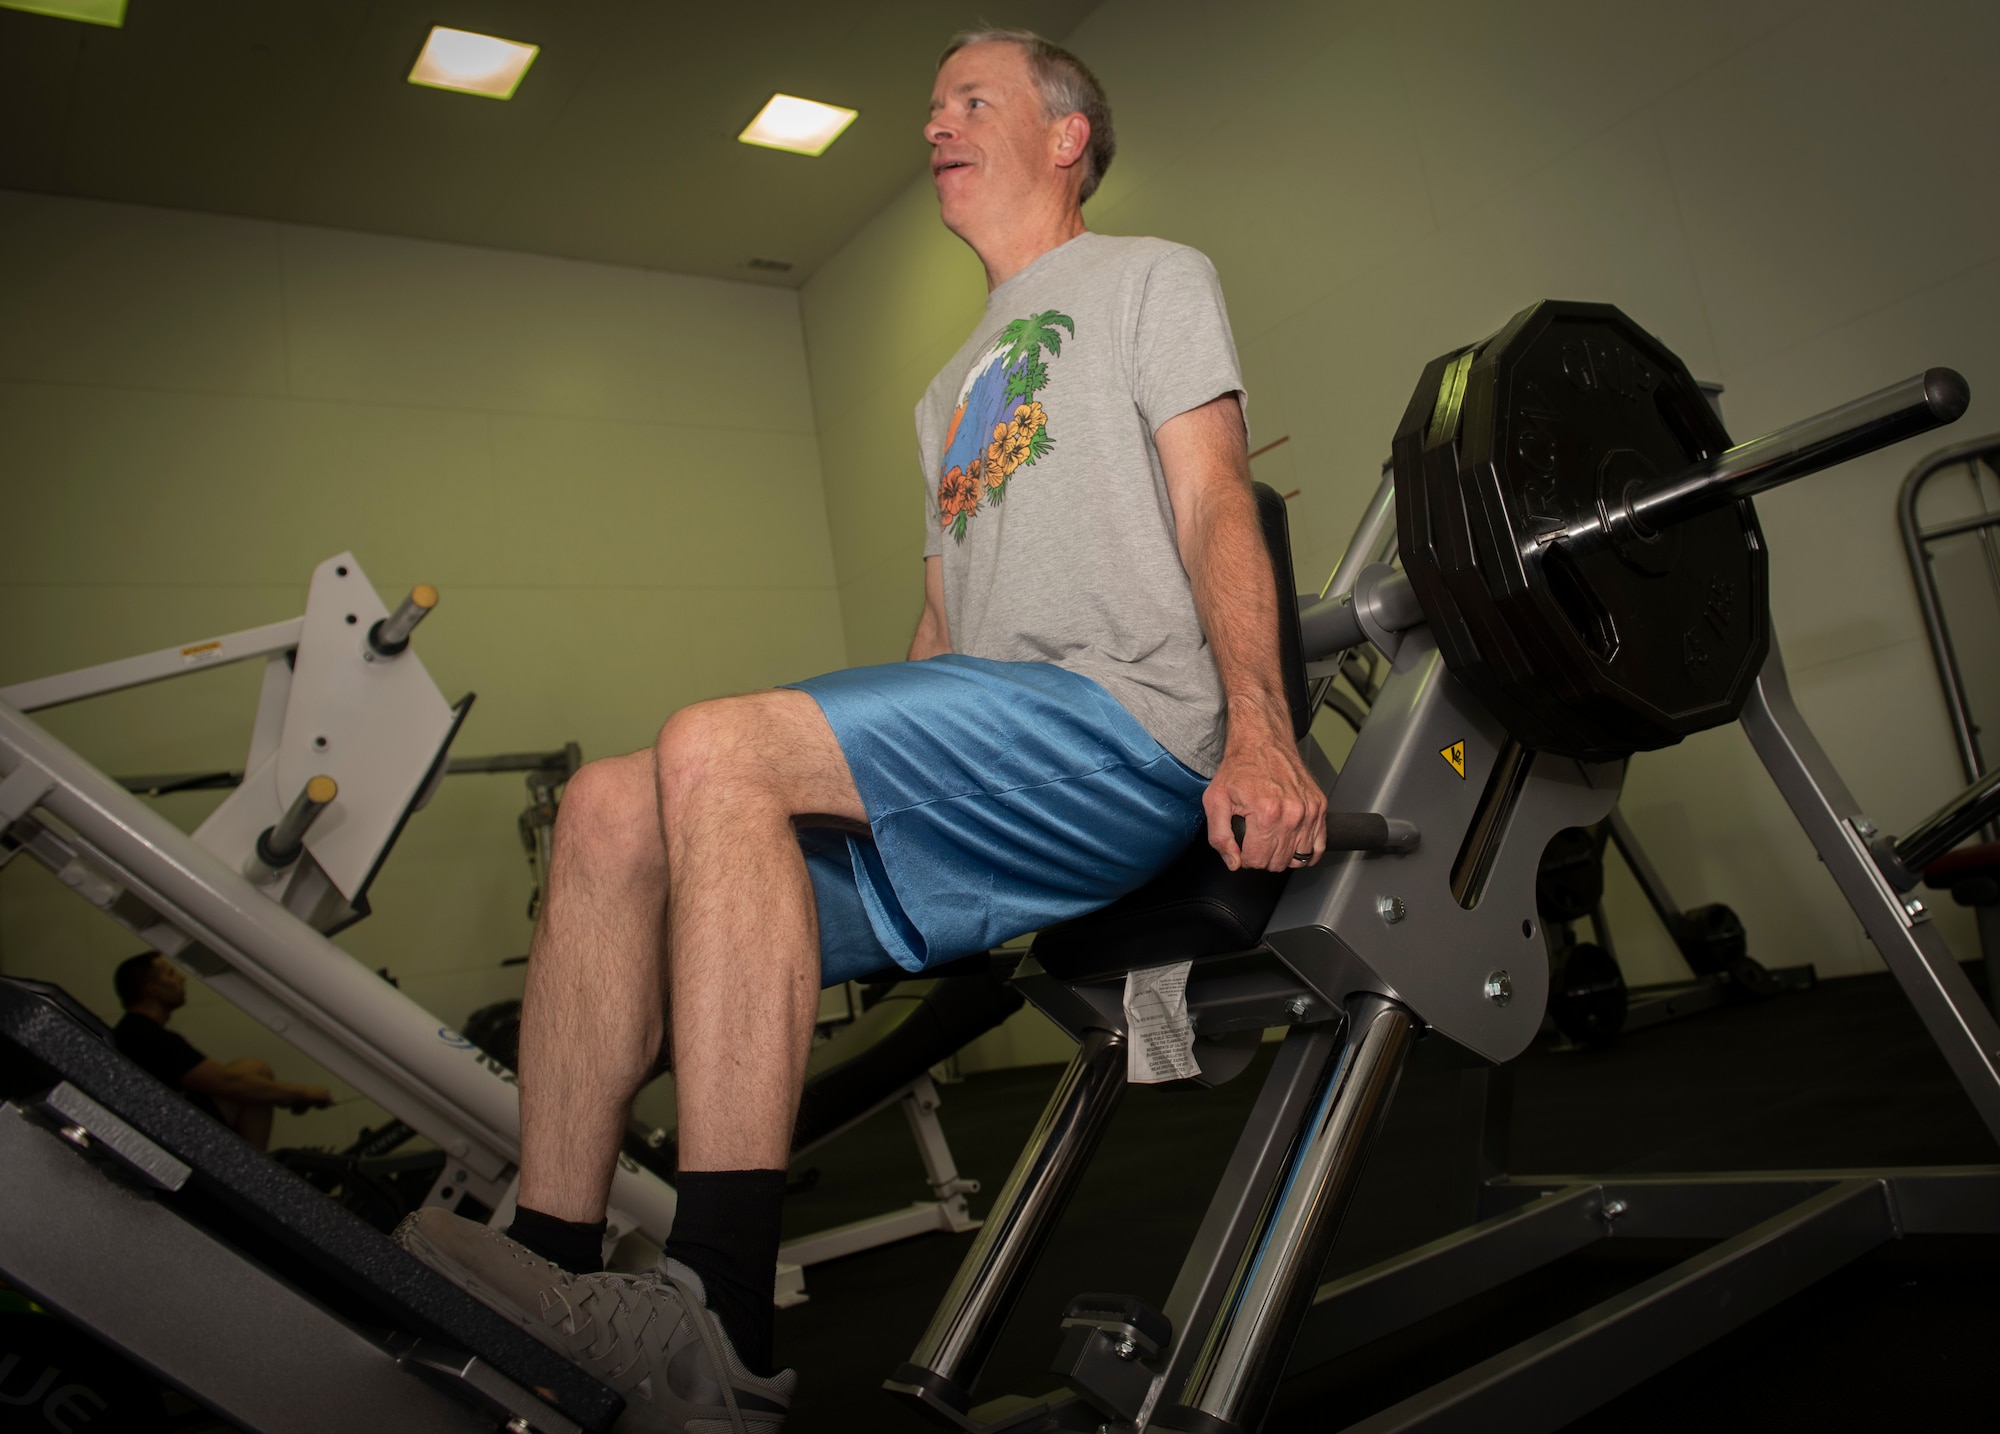 Joseph Trese, 17th Test Squadron test analyst, performs a leg press June 17, 2020, at the fitness center at Schriever Air Force Base, Colorado. The fitness center has resumed normal hours of operation and is open 5 a.m. to 7:30 p.m. on weekdays and 7 a.m. to 3 p.m. on weekends. (U.S. Air Force photo by Cara Cannello)